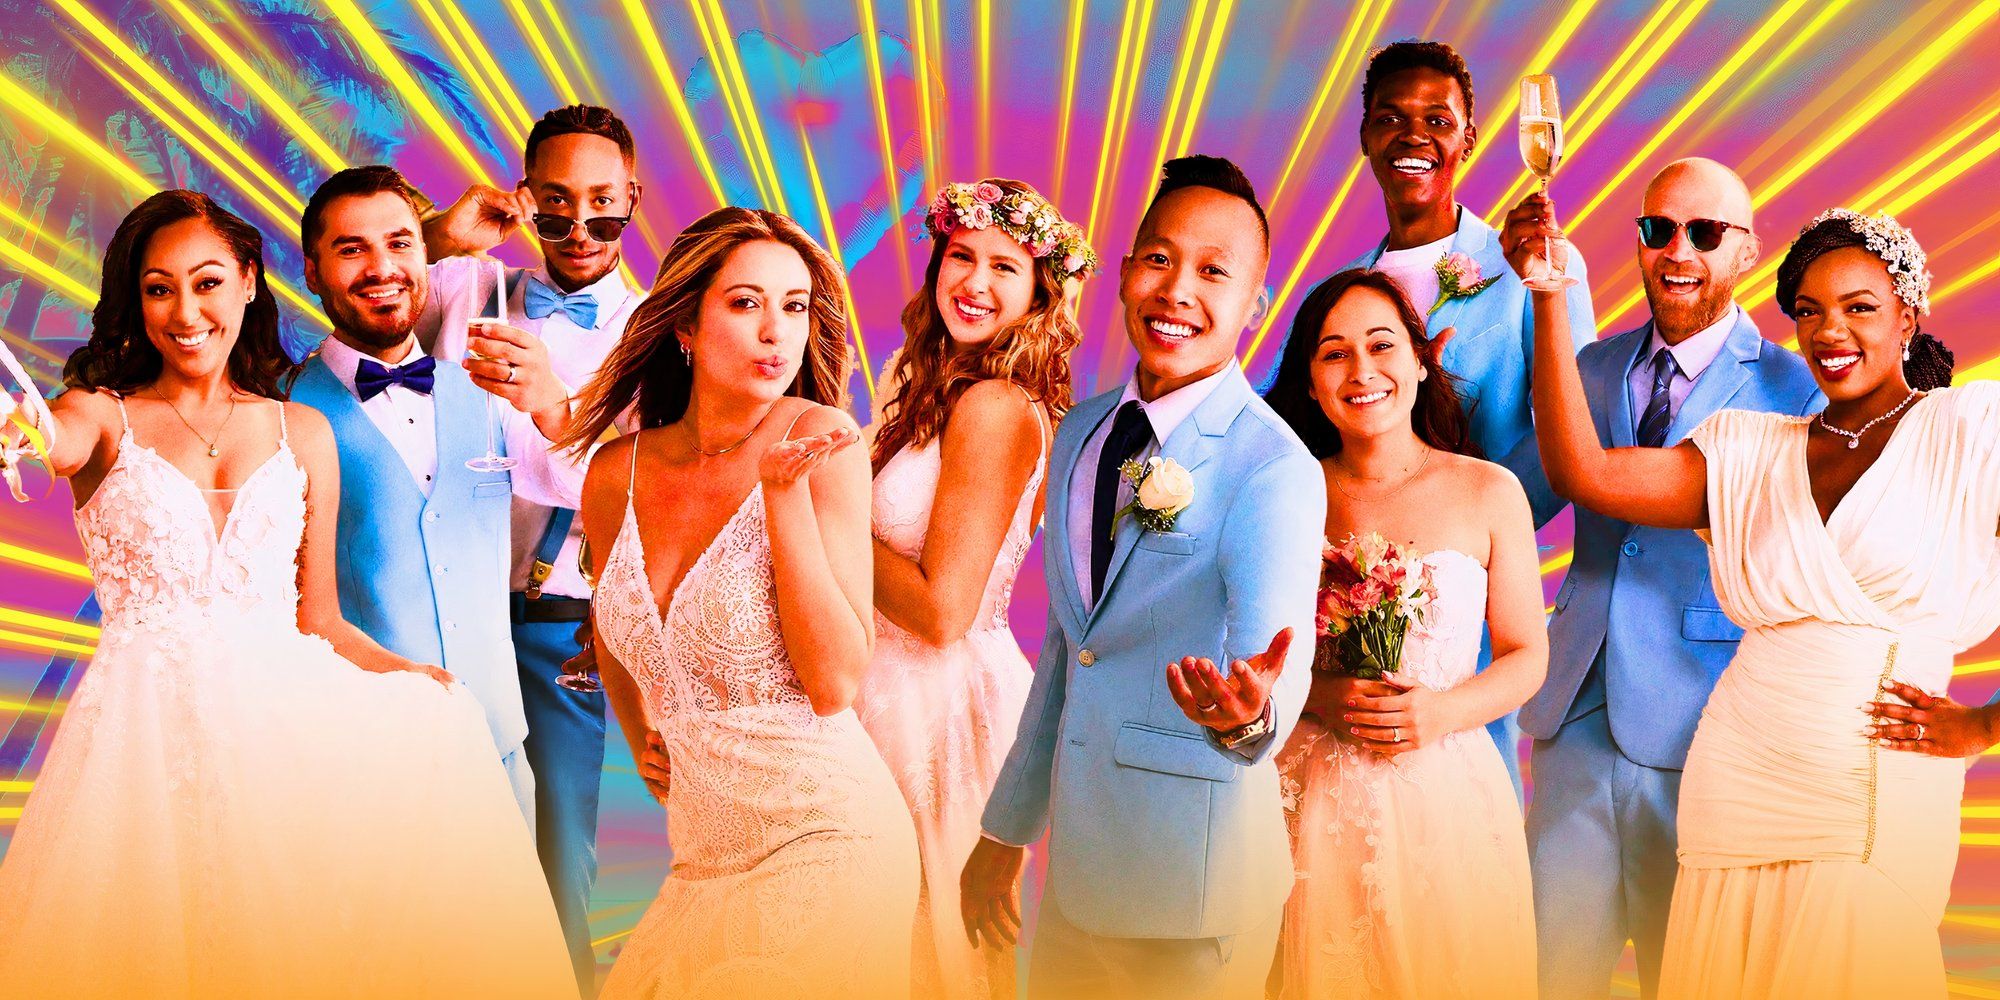 married at first sight season 15 cast wearing formal wear and smiling with colorful background